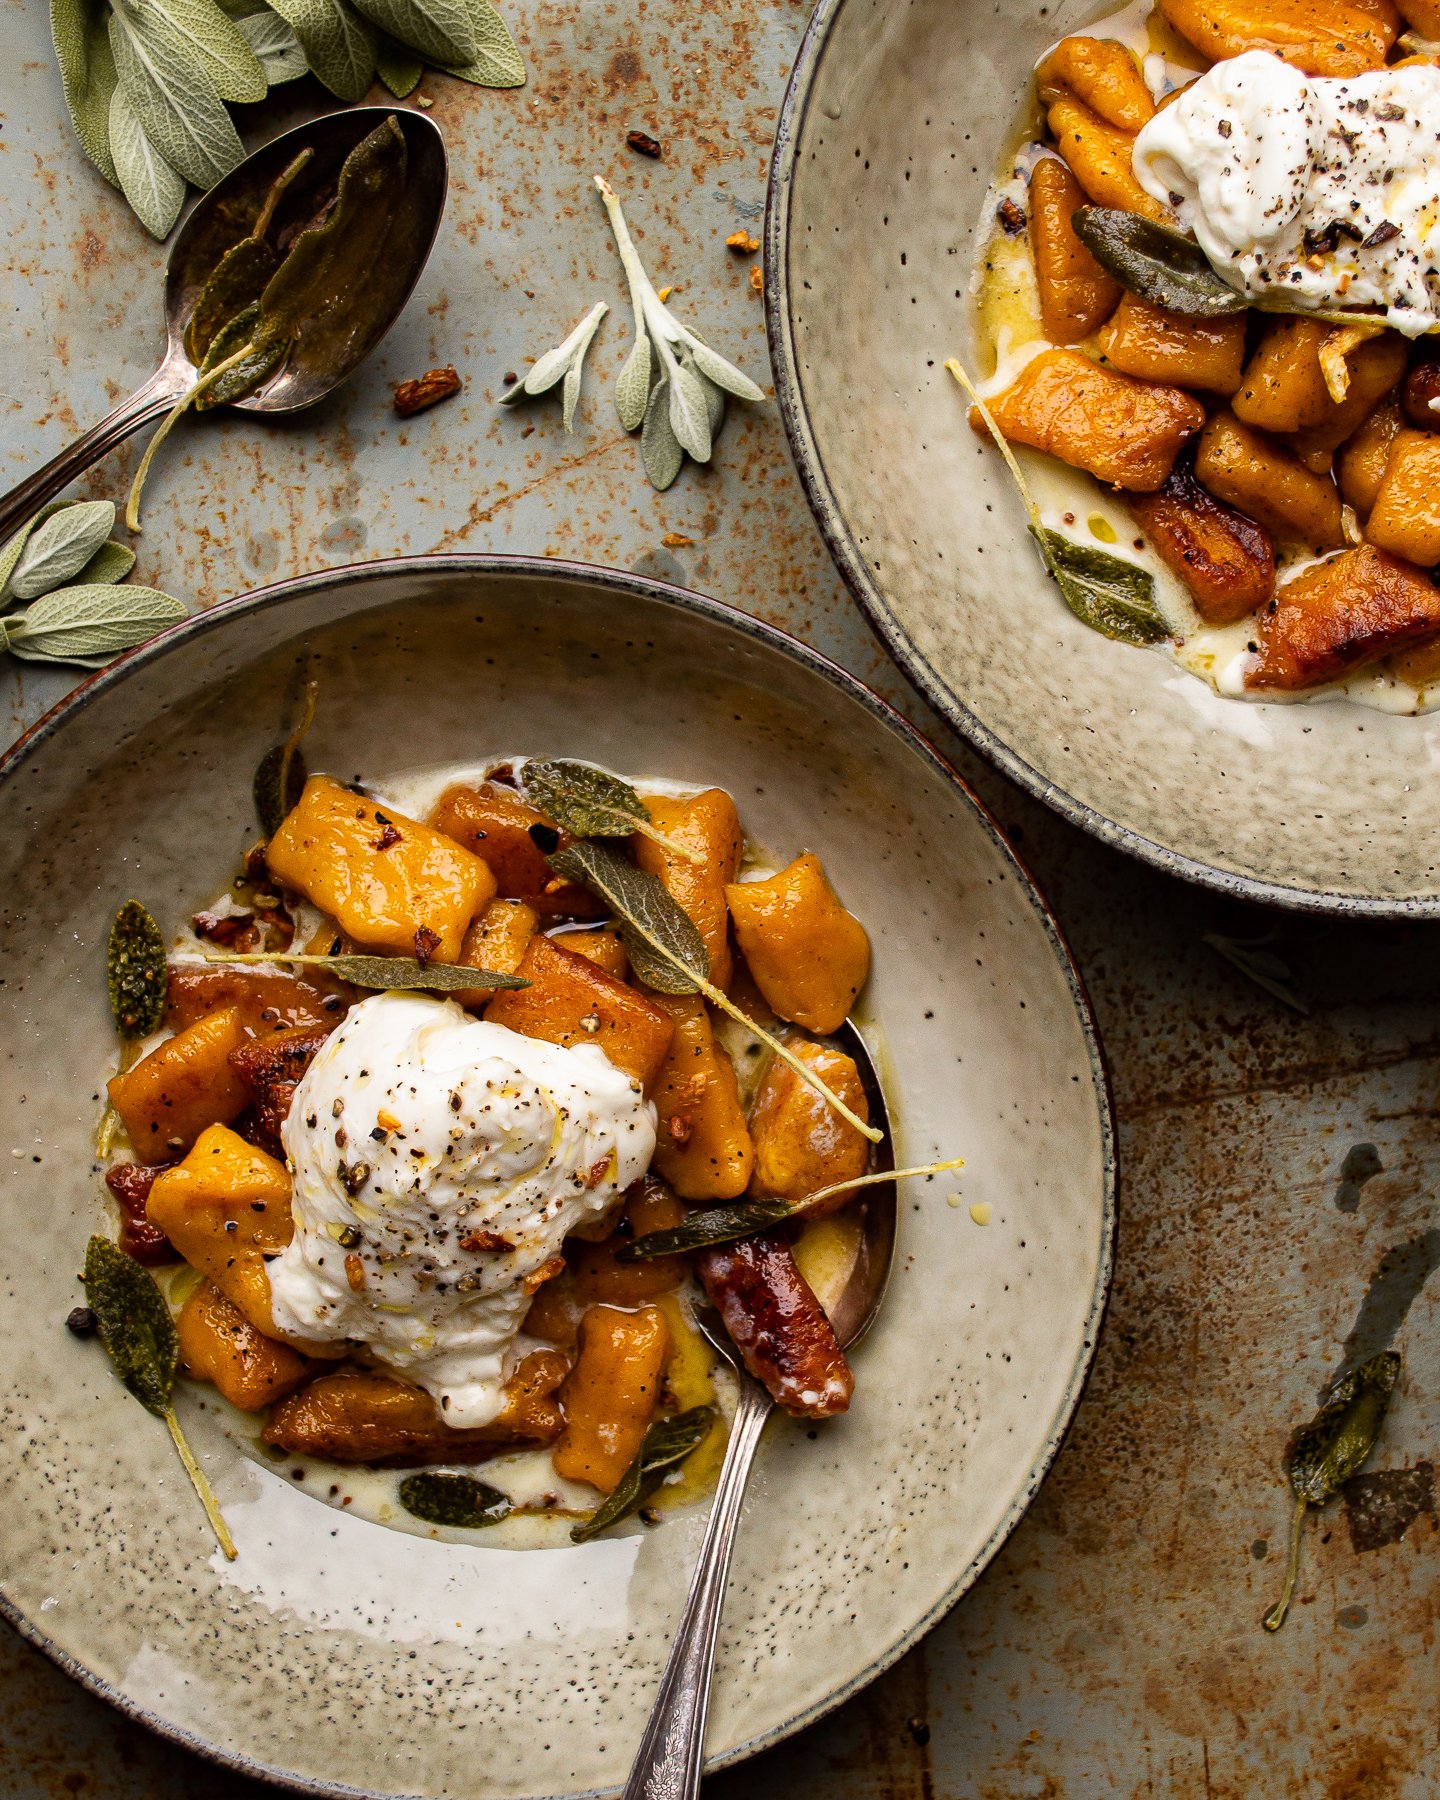 Kabocha Squash Gnocchi with Maple Brown Butter Sauce via Inspired With a Twist